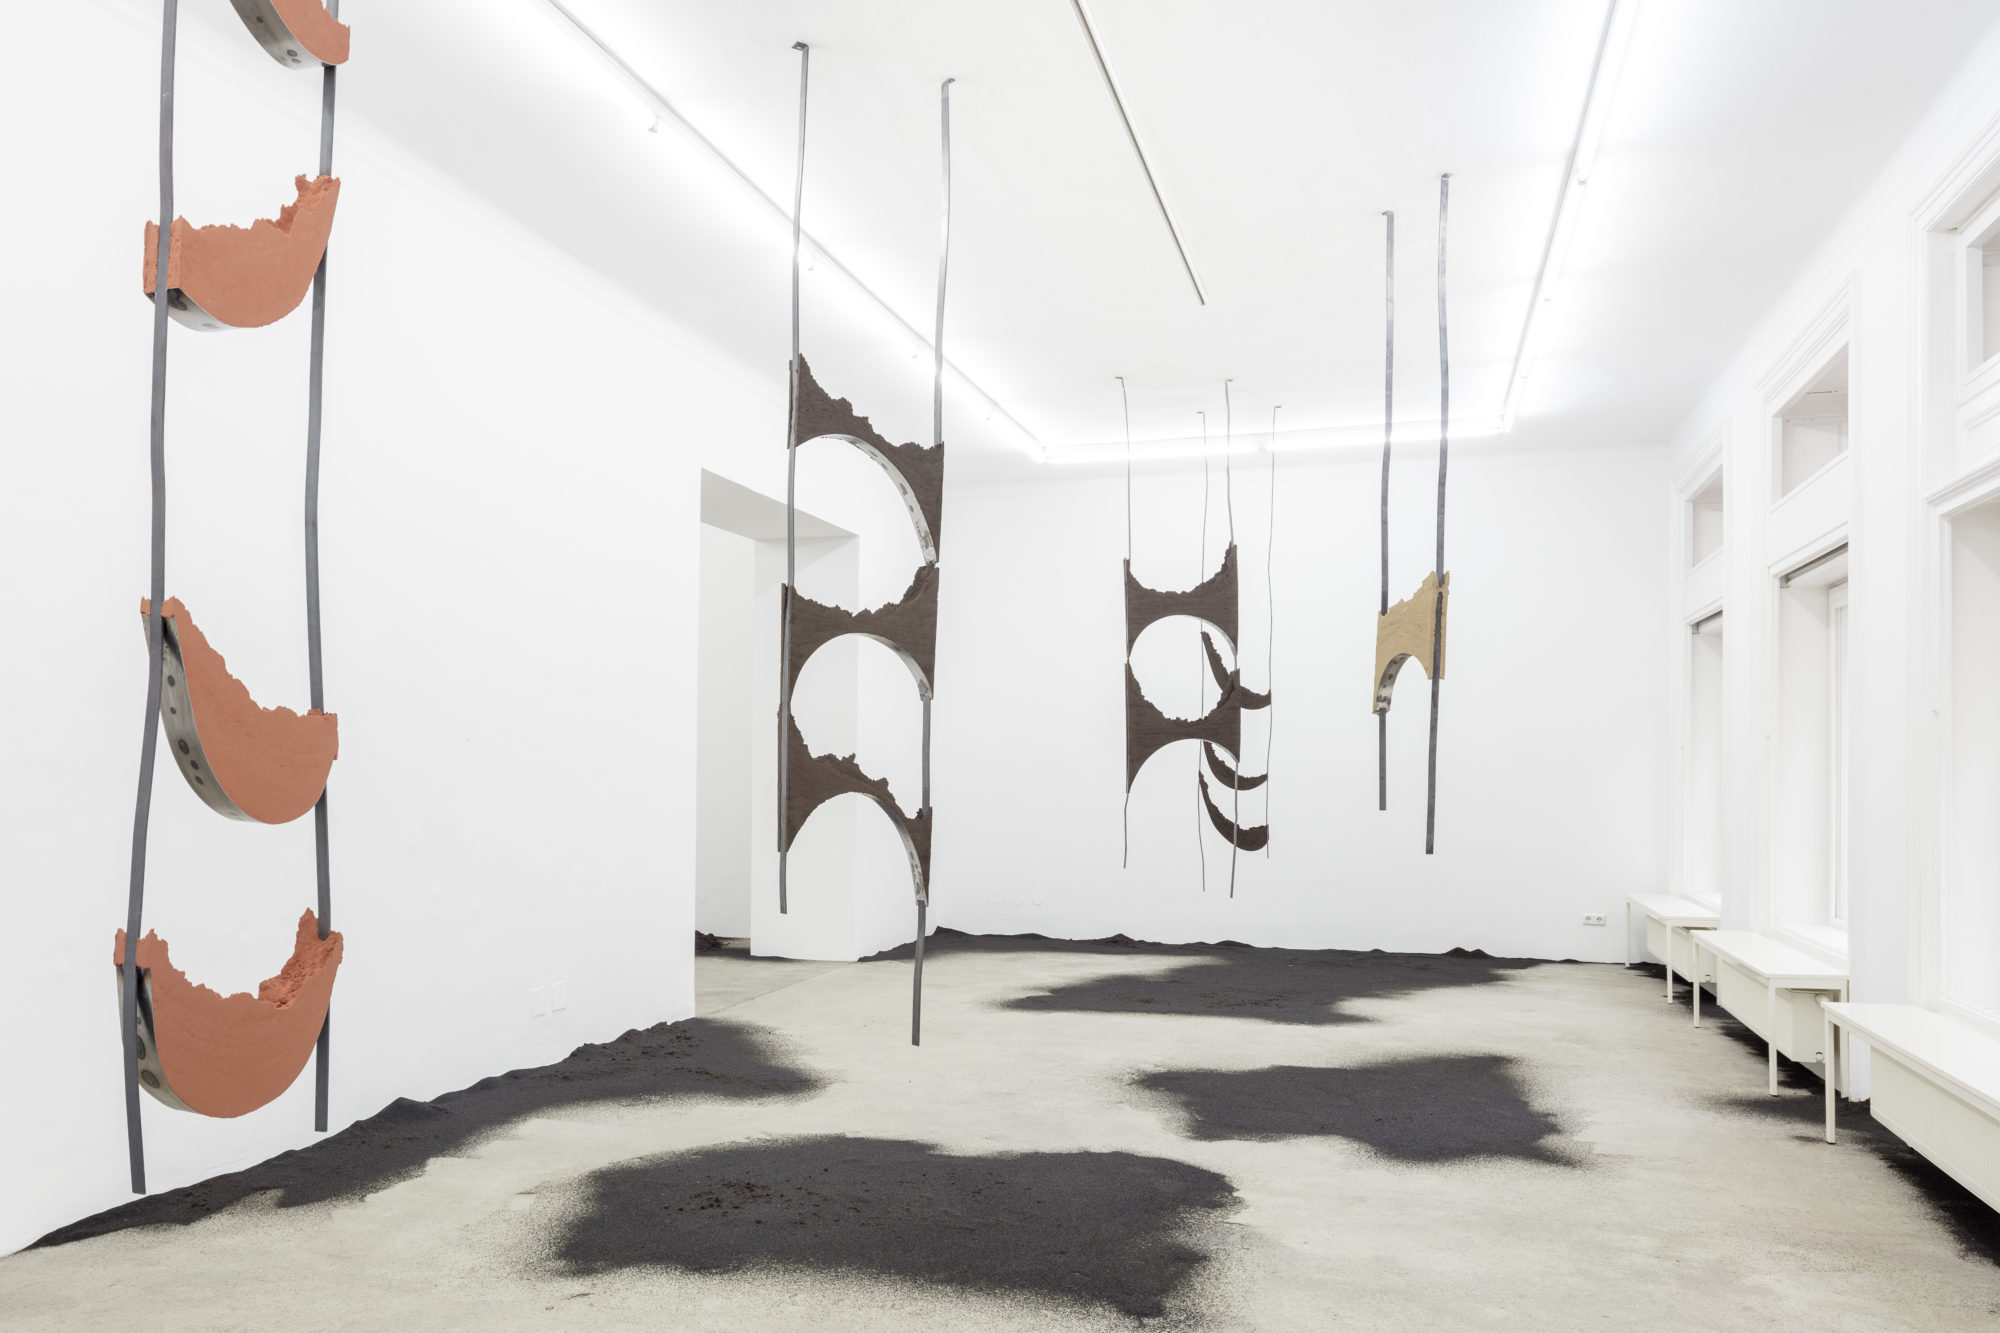 Five sculpture pieces hang from the ceiling in a gallery space